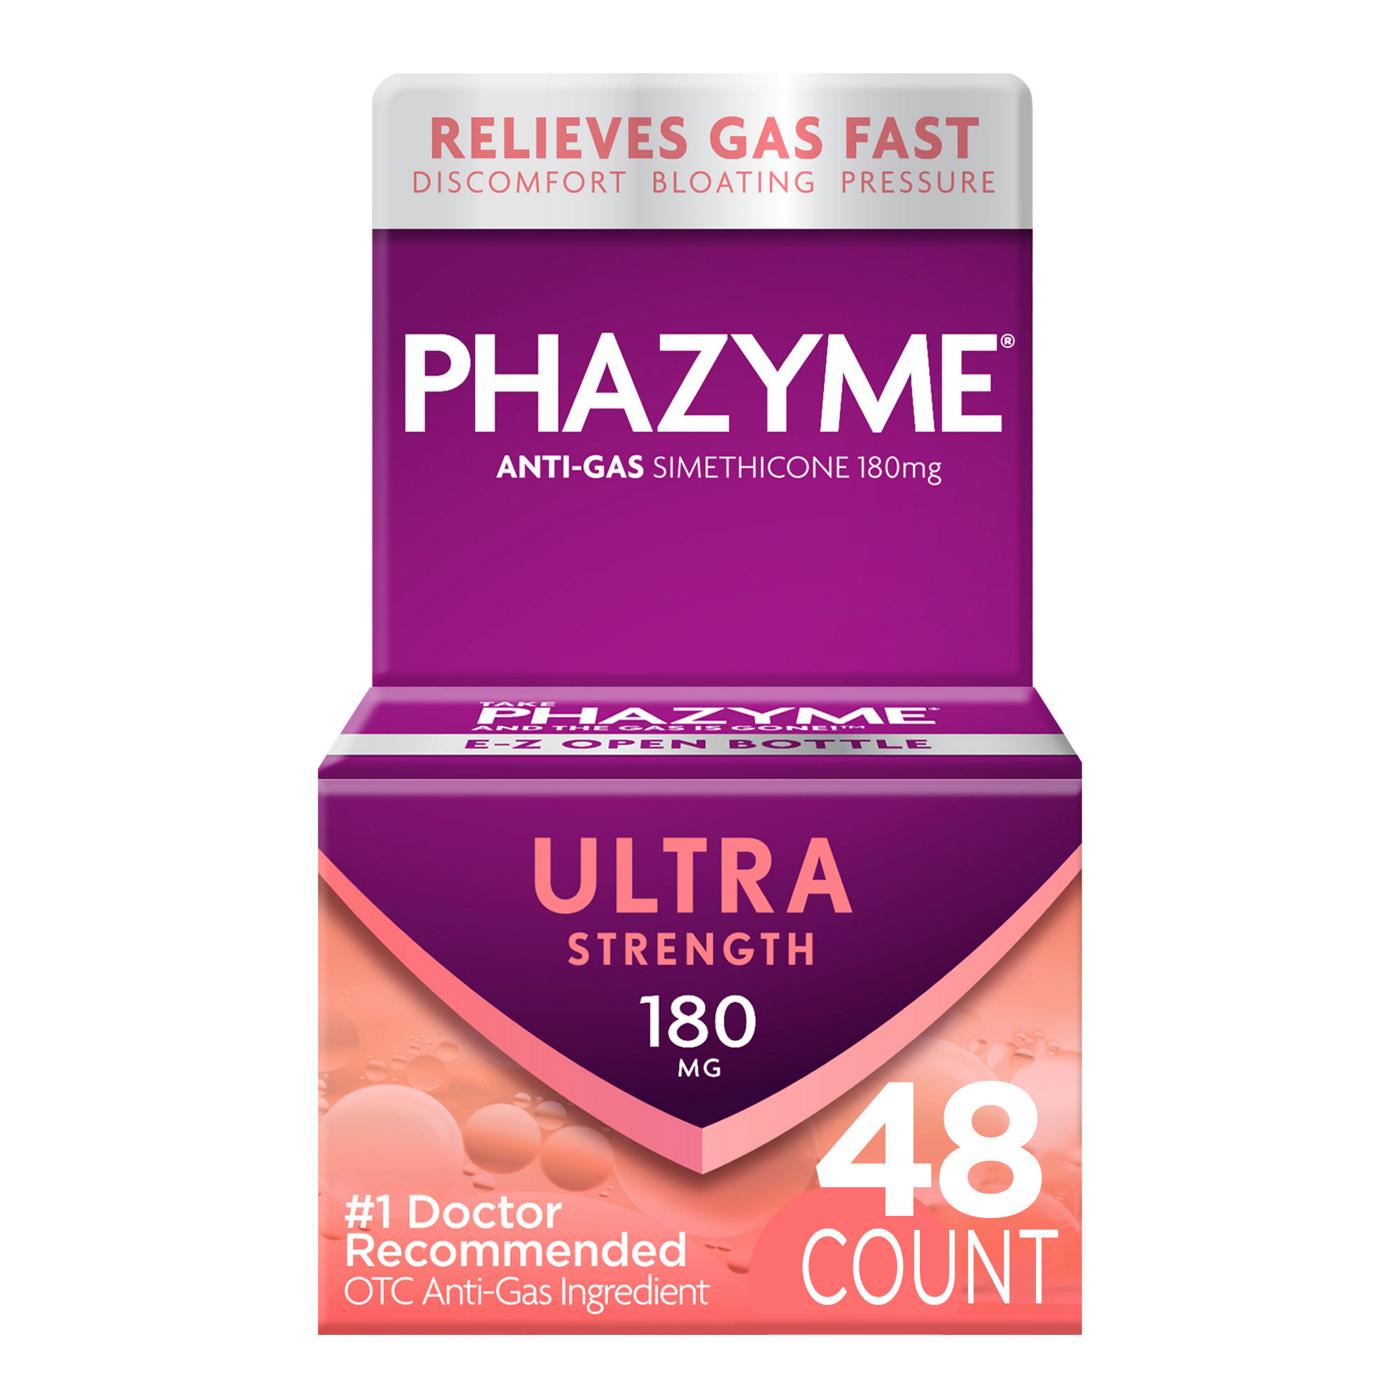 Phazyme Ultra Strength Gas & Bloating Relief; image 1 of 5